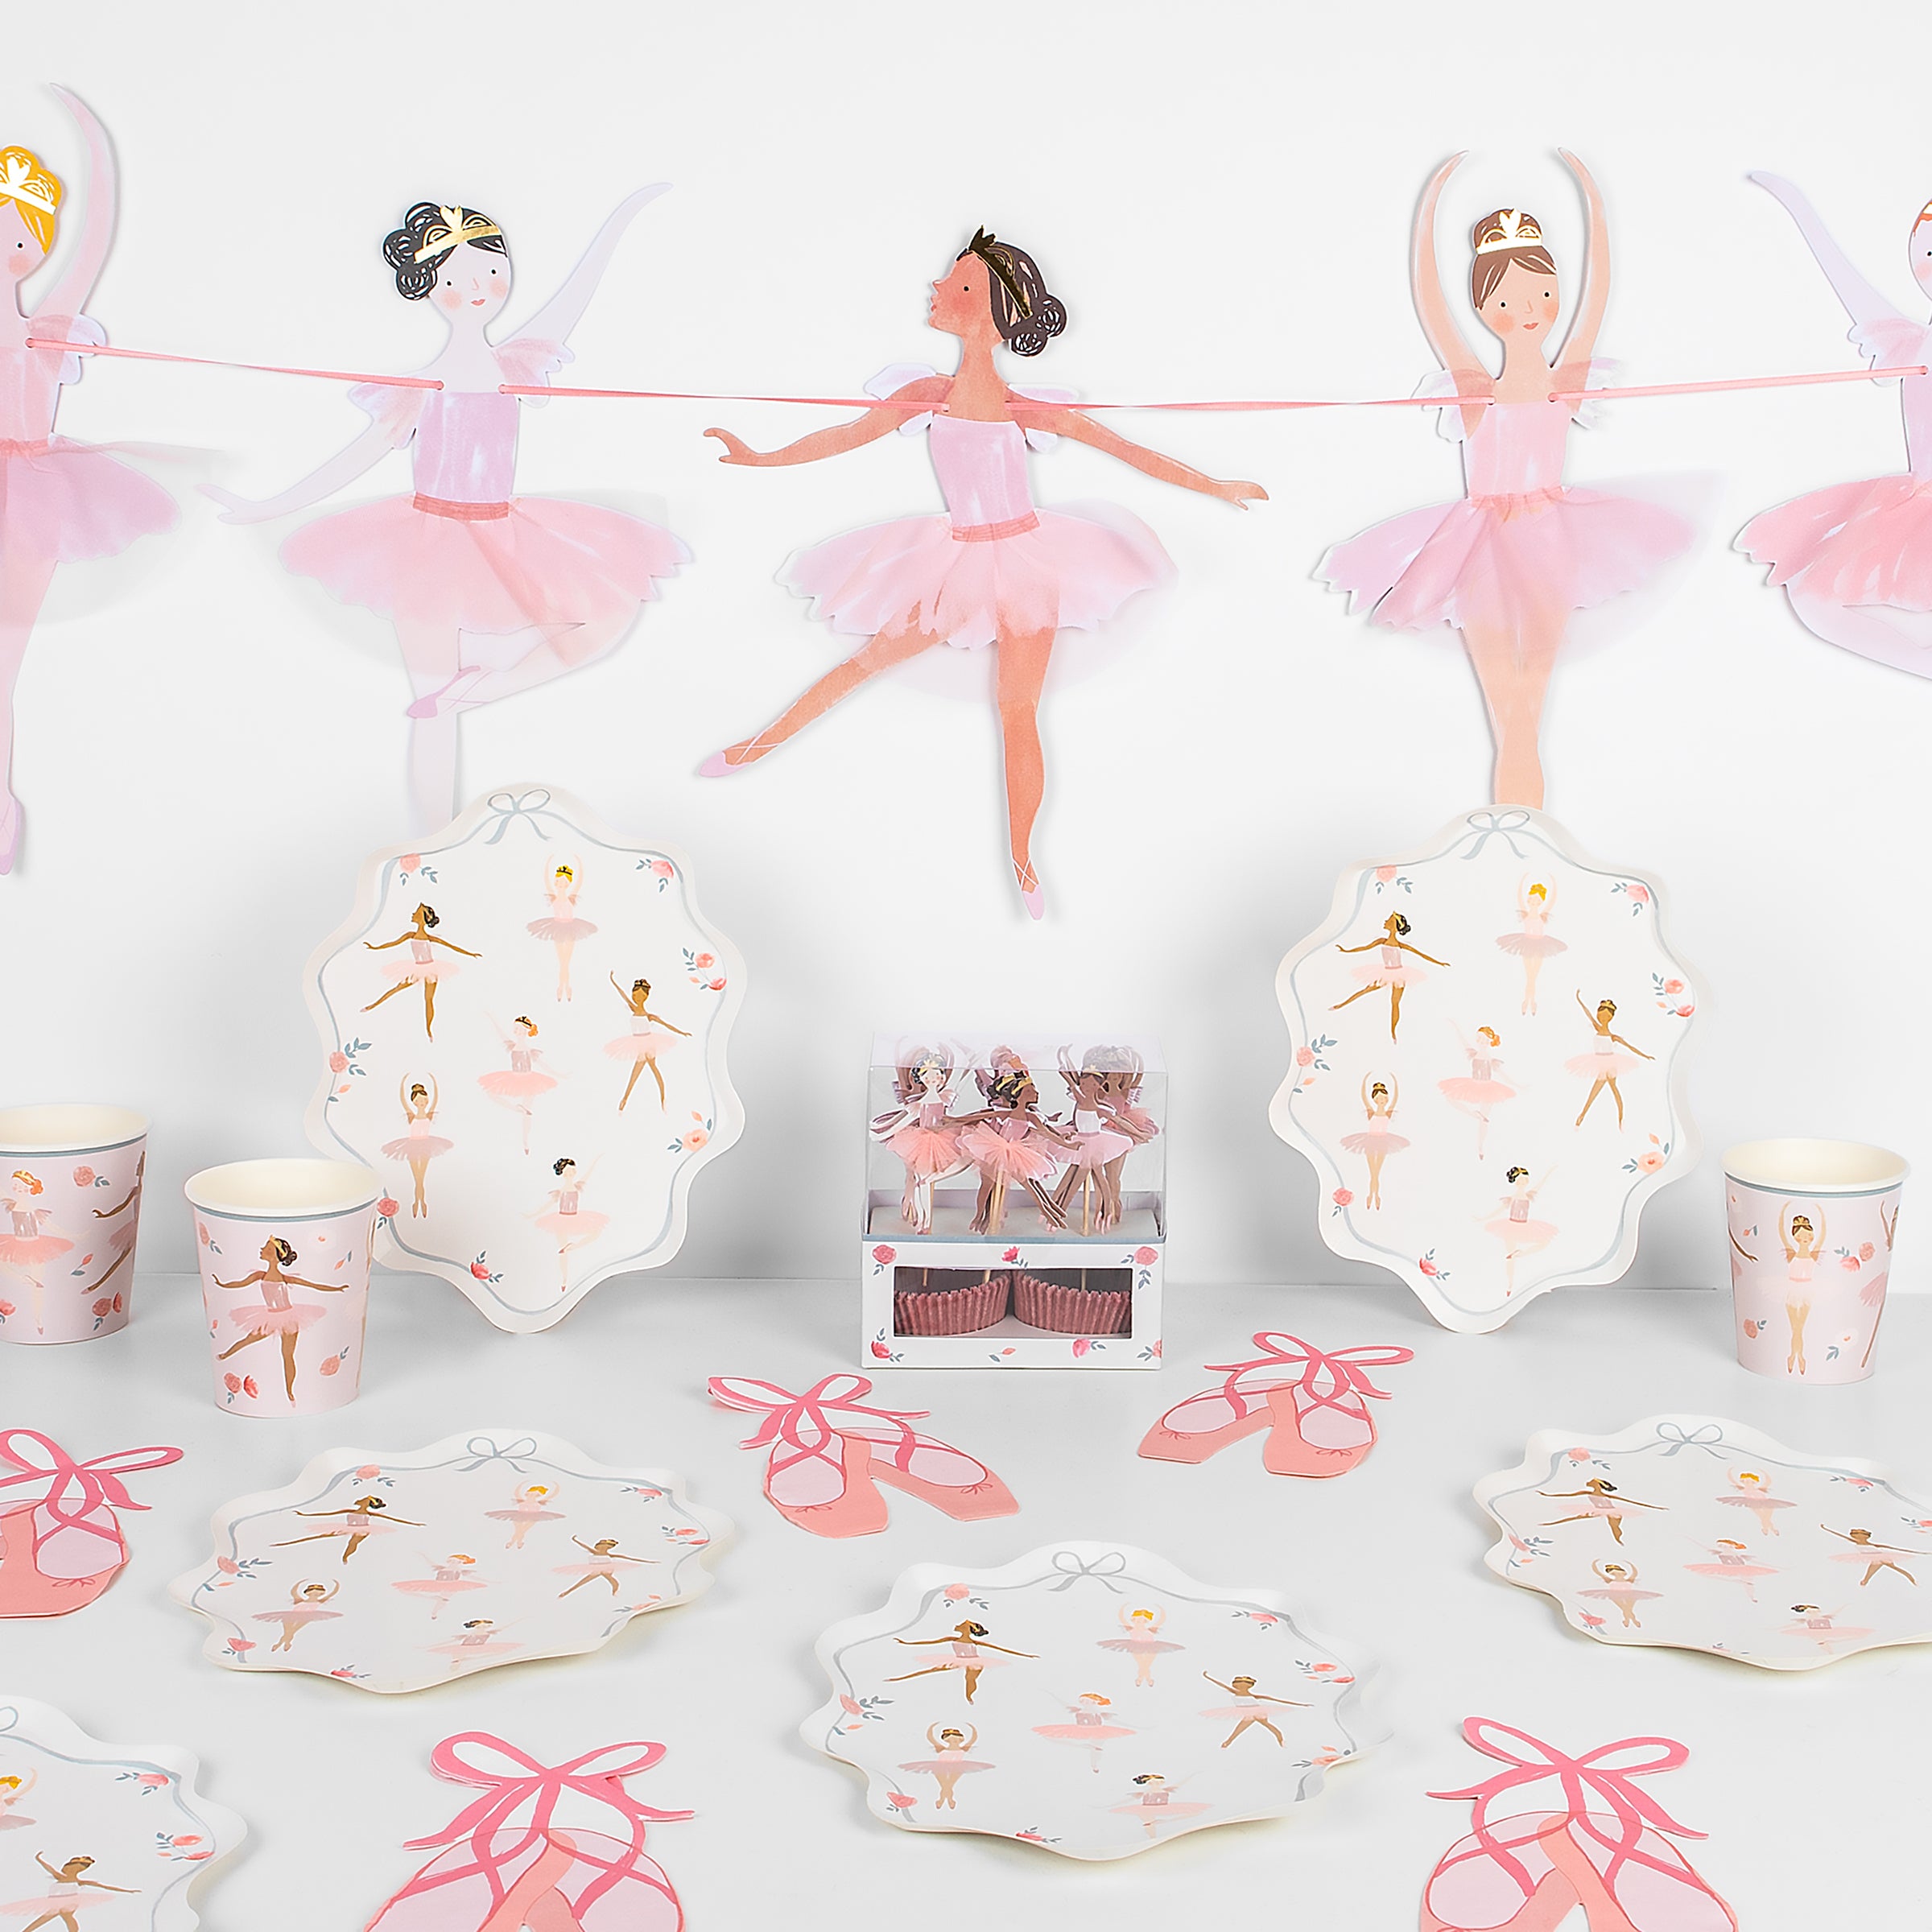 This set includes ballerina decorations for a birthday party, and tableware and a cupcake kit.